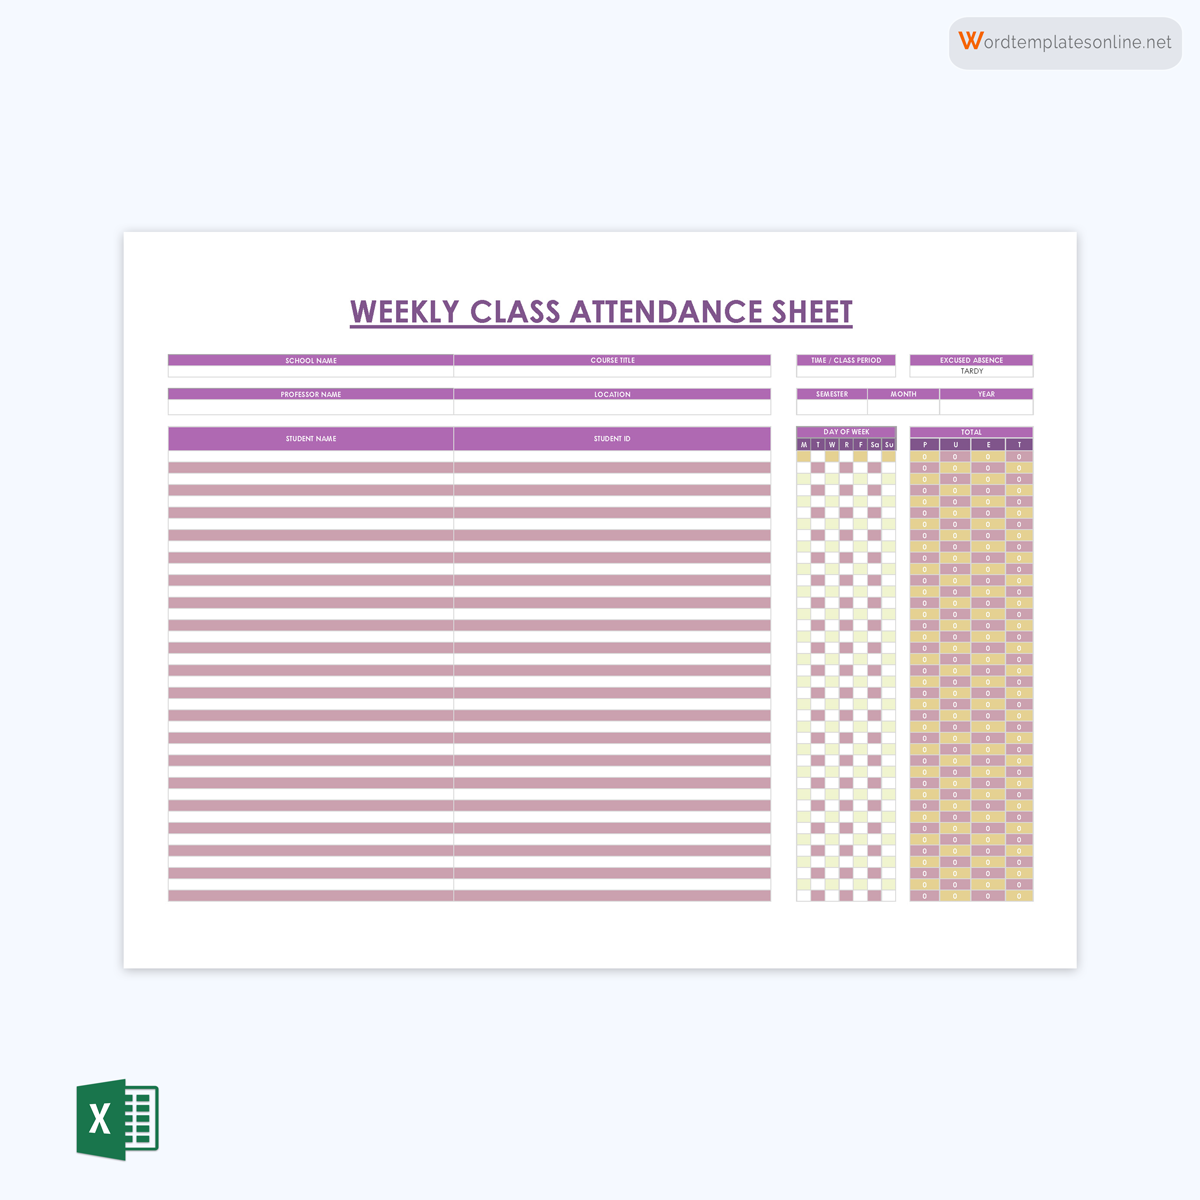 Attendance sheet template for free download